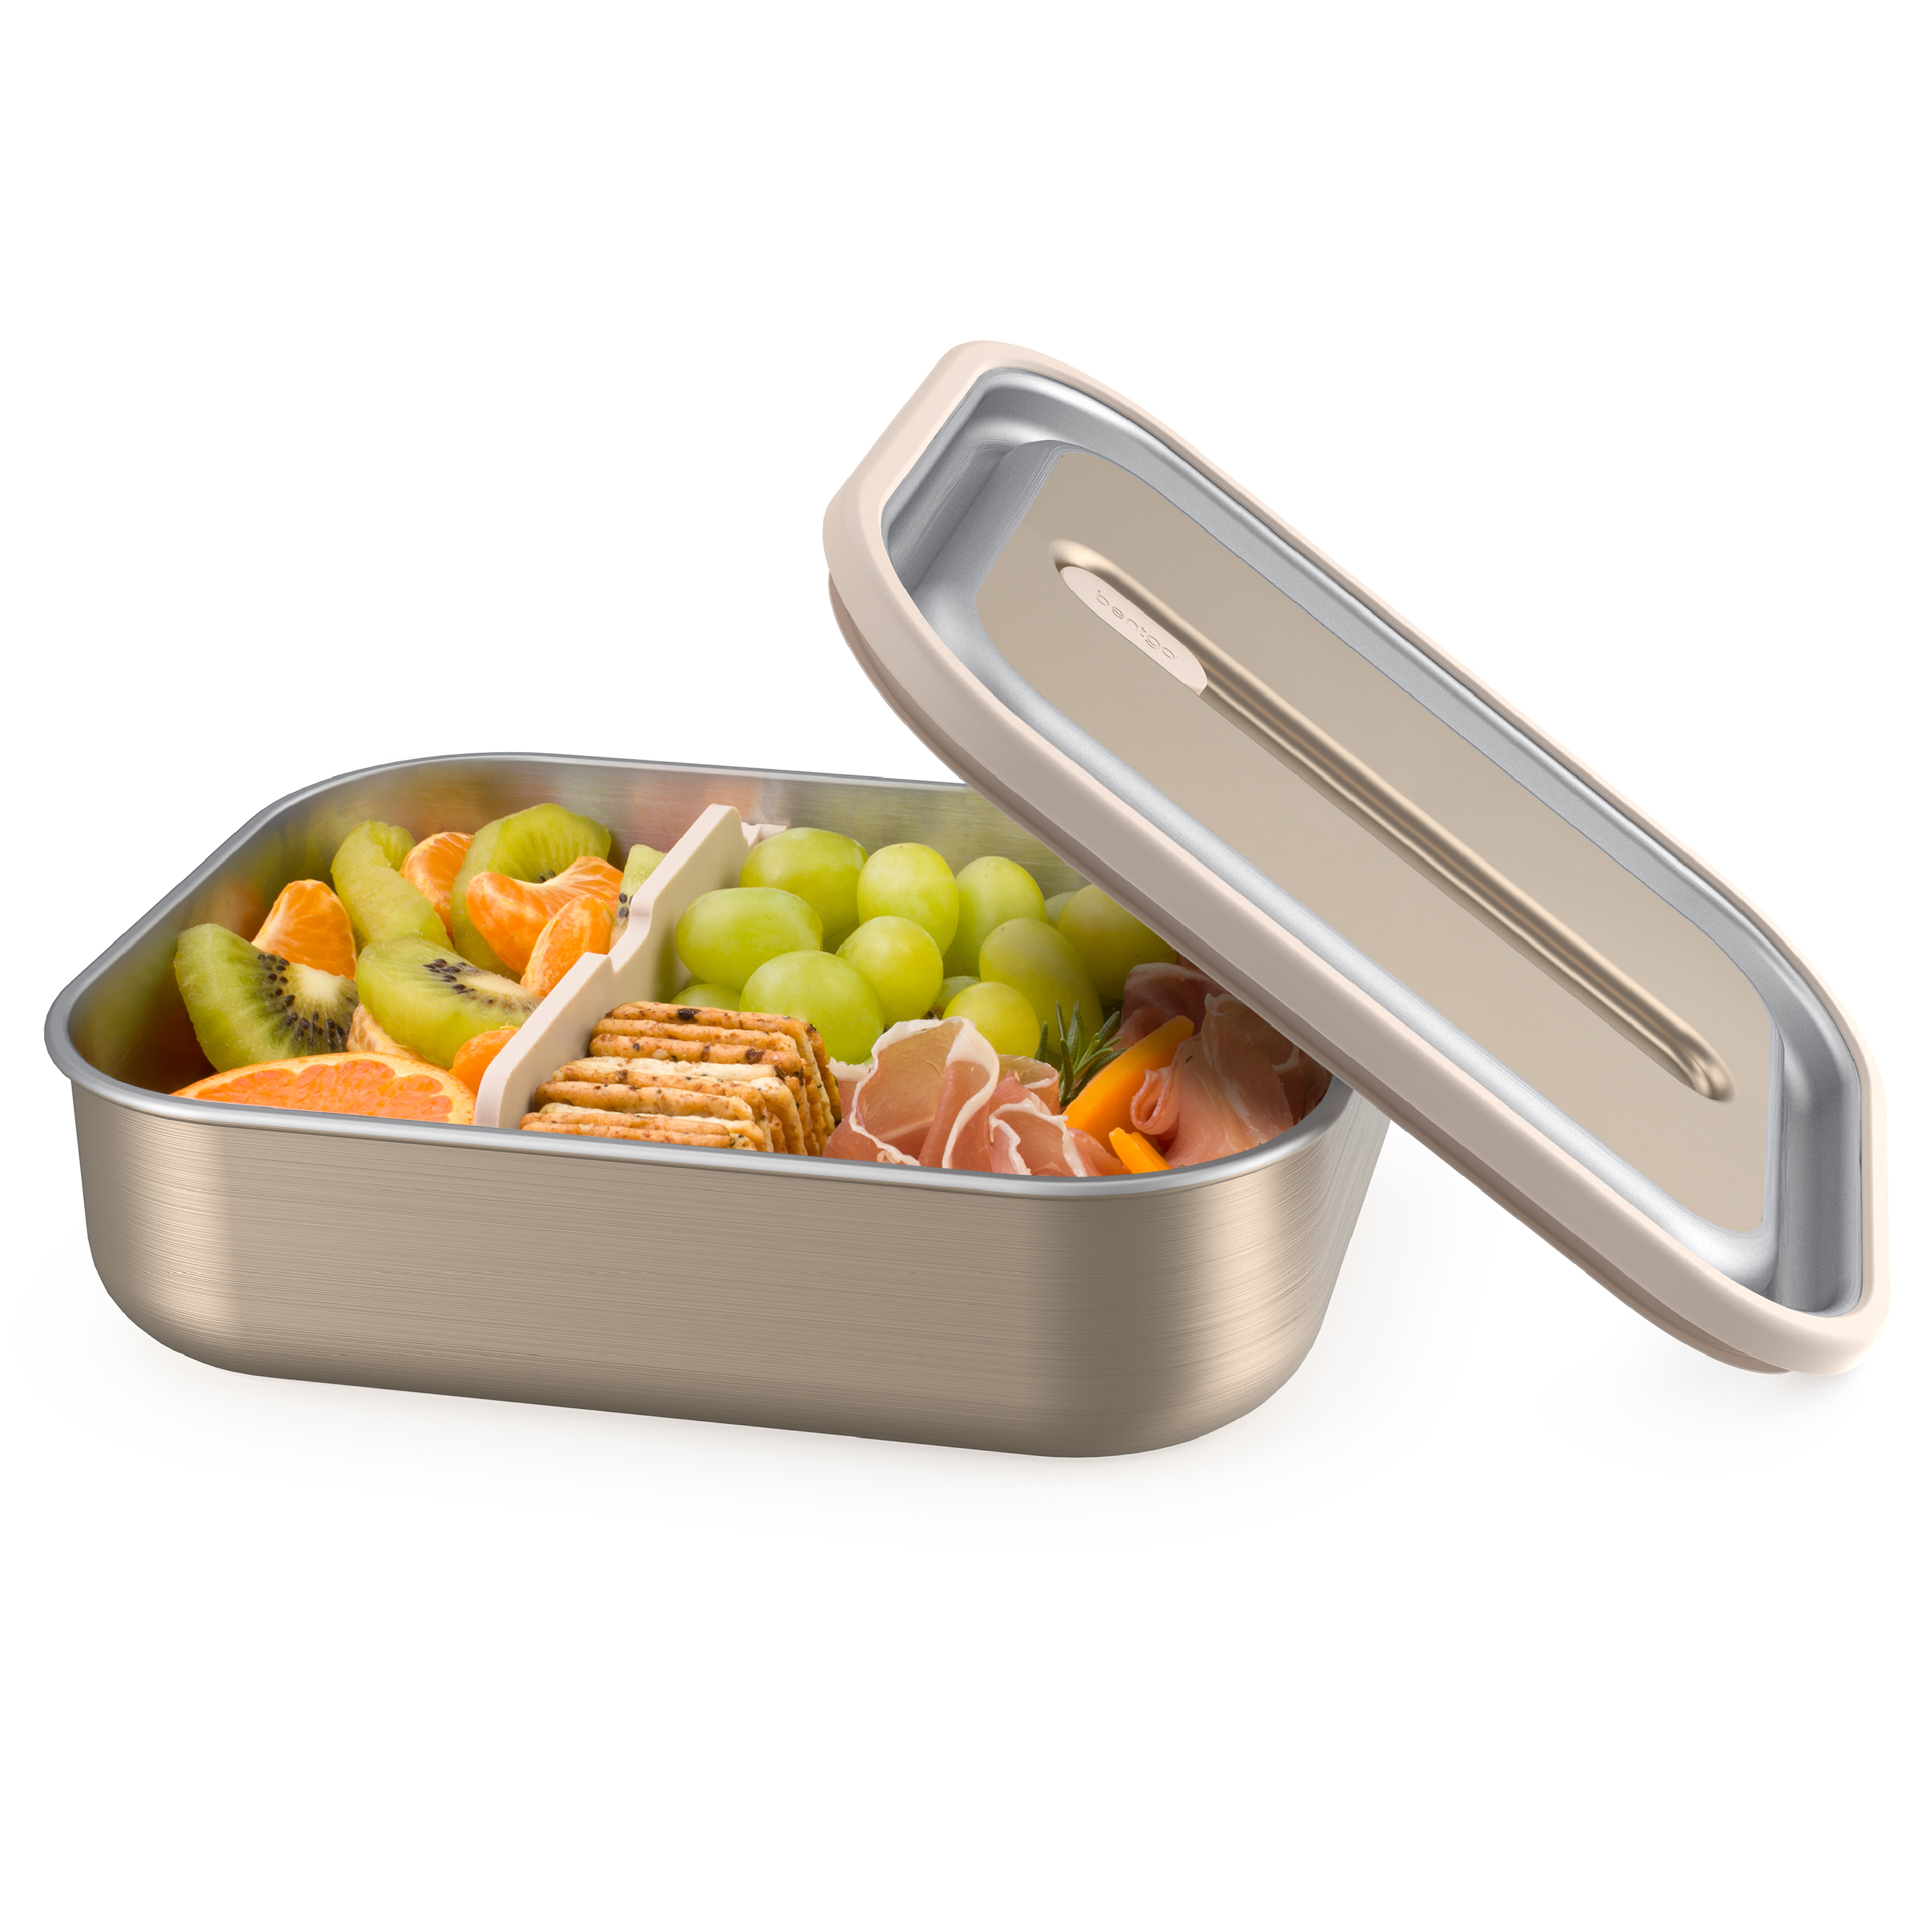 A delicious lunch is safely packed in a Bentgo stainless steel container.  (Courtesy of Bentgo)